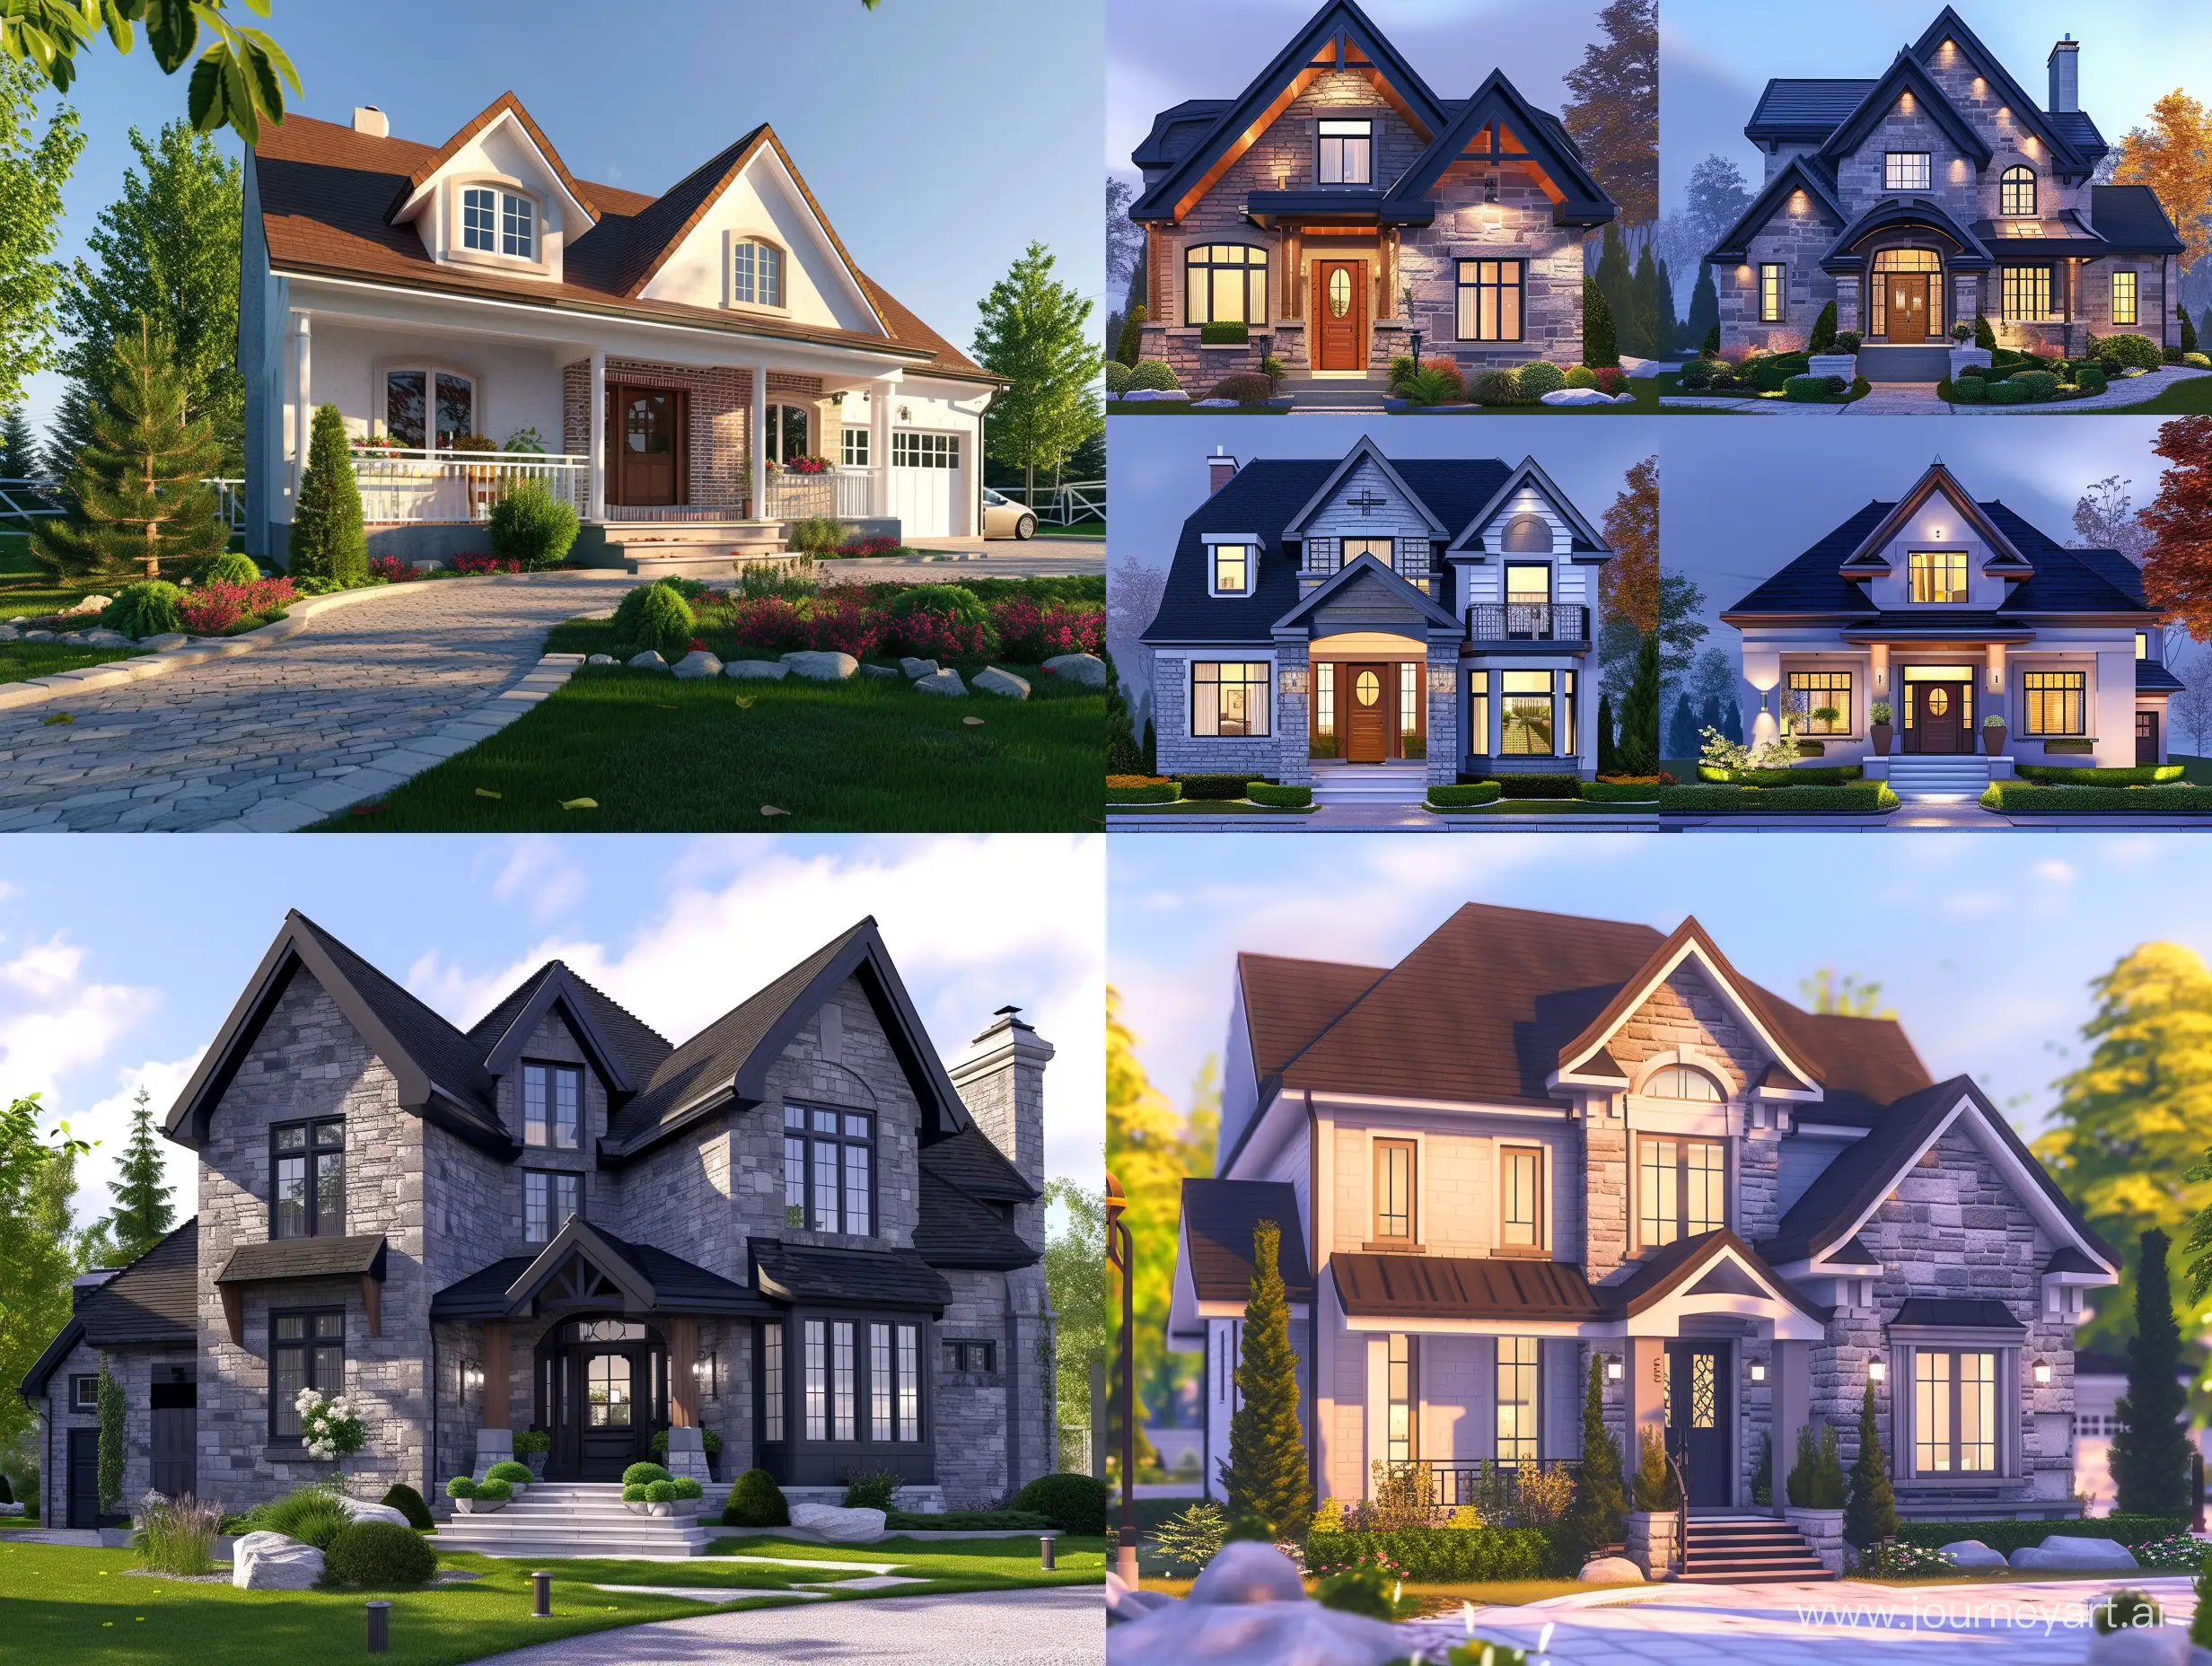 Complete set of Canadian Houses in the Greater Montreal area with interiors and exteriors representing a true Canadian lifestyle in a beautiful comfortable environment